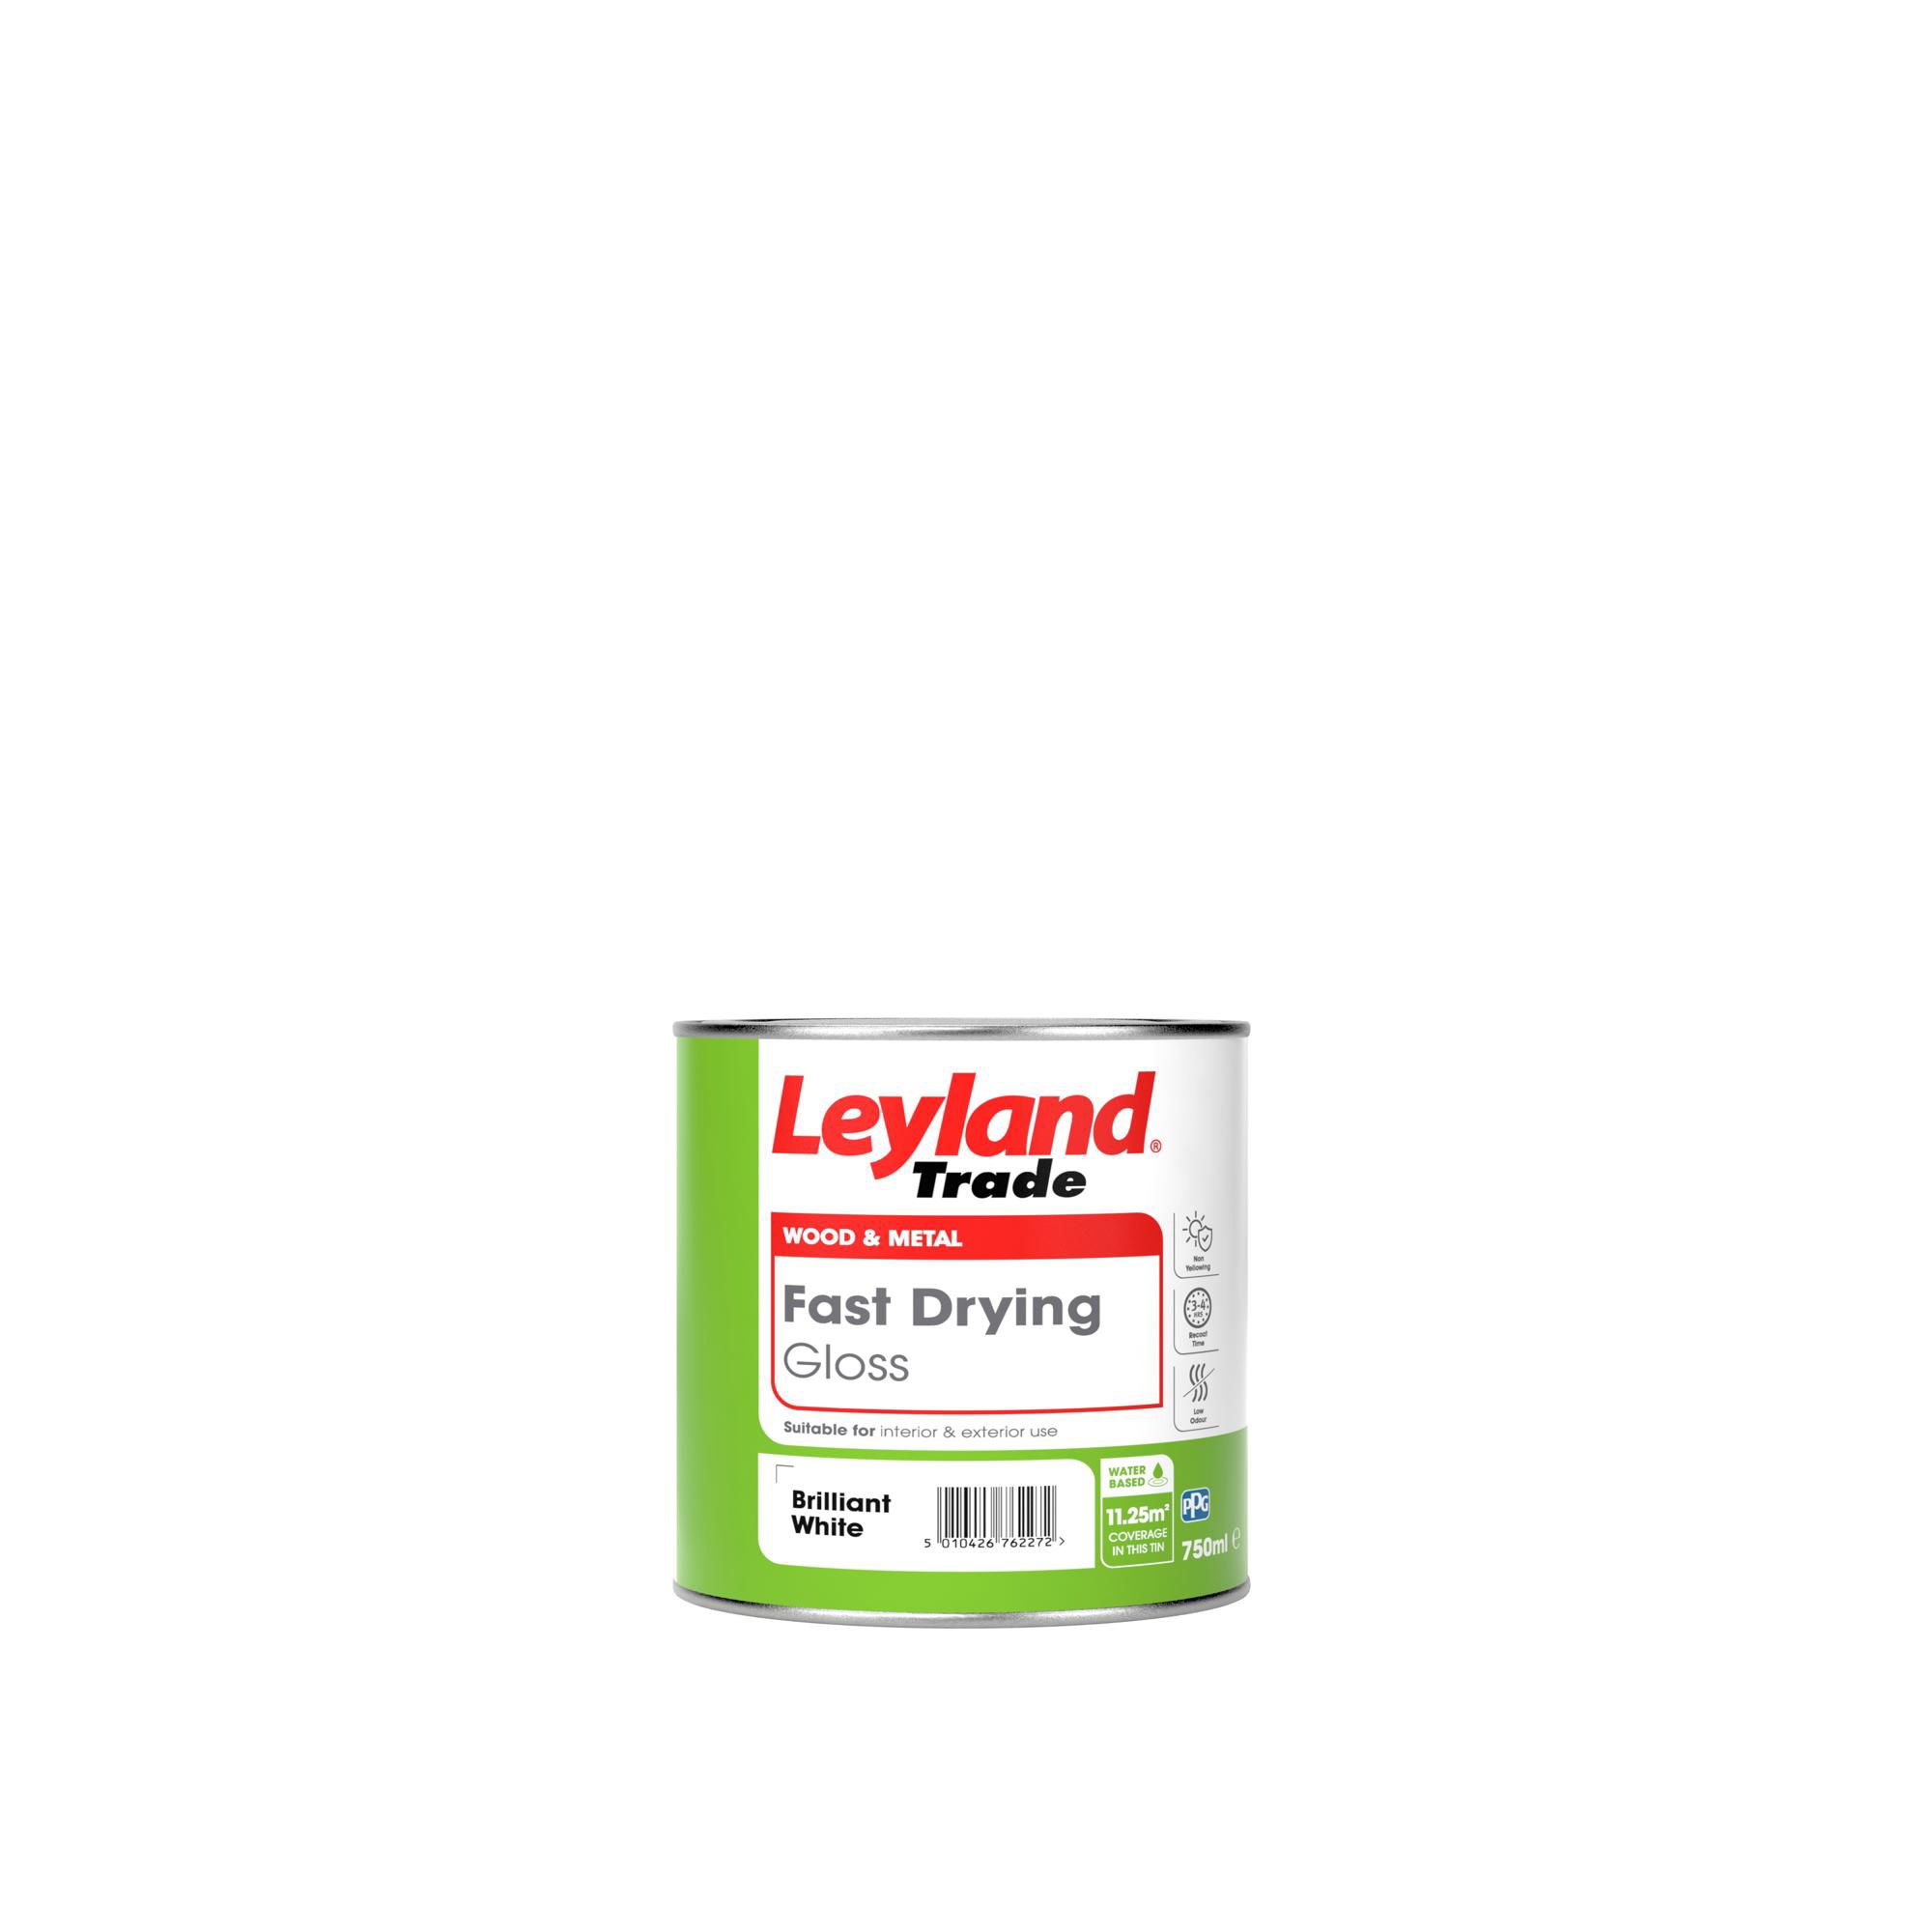 Leyland Trade Quick Dry Pure brilliant white Gloss Metal & wood paint, 750ml